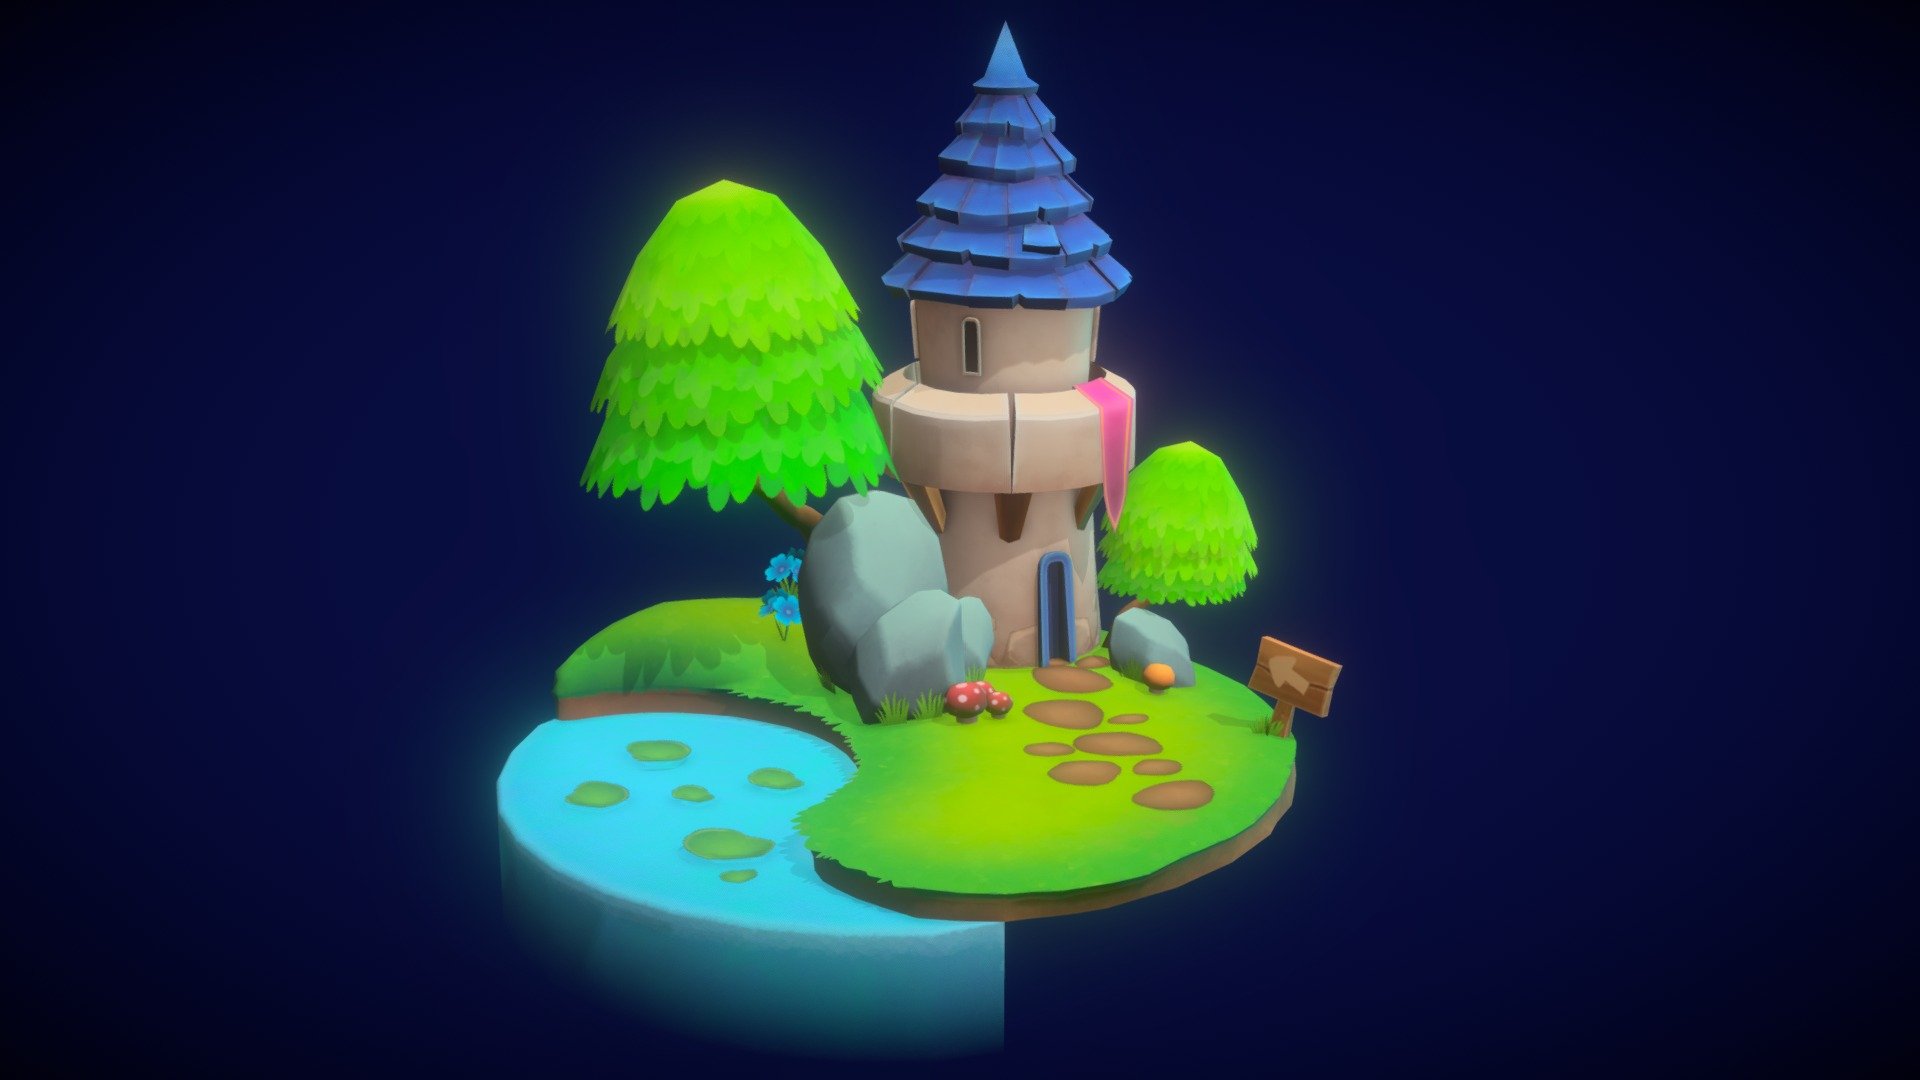 A stylized hand-painted diorama of a mysterious tower on a floating island. 

Personal texturing practice. Concept by Victoria Yakovleva: https://www.artstation.com/artwork/JJPYD

View full animated project on my Arstation: https://www.artstation.com/artwork/N5Nq6q - Floating Fantasy Island - 3D model by HalfAsleepArtist 3d model